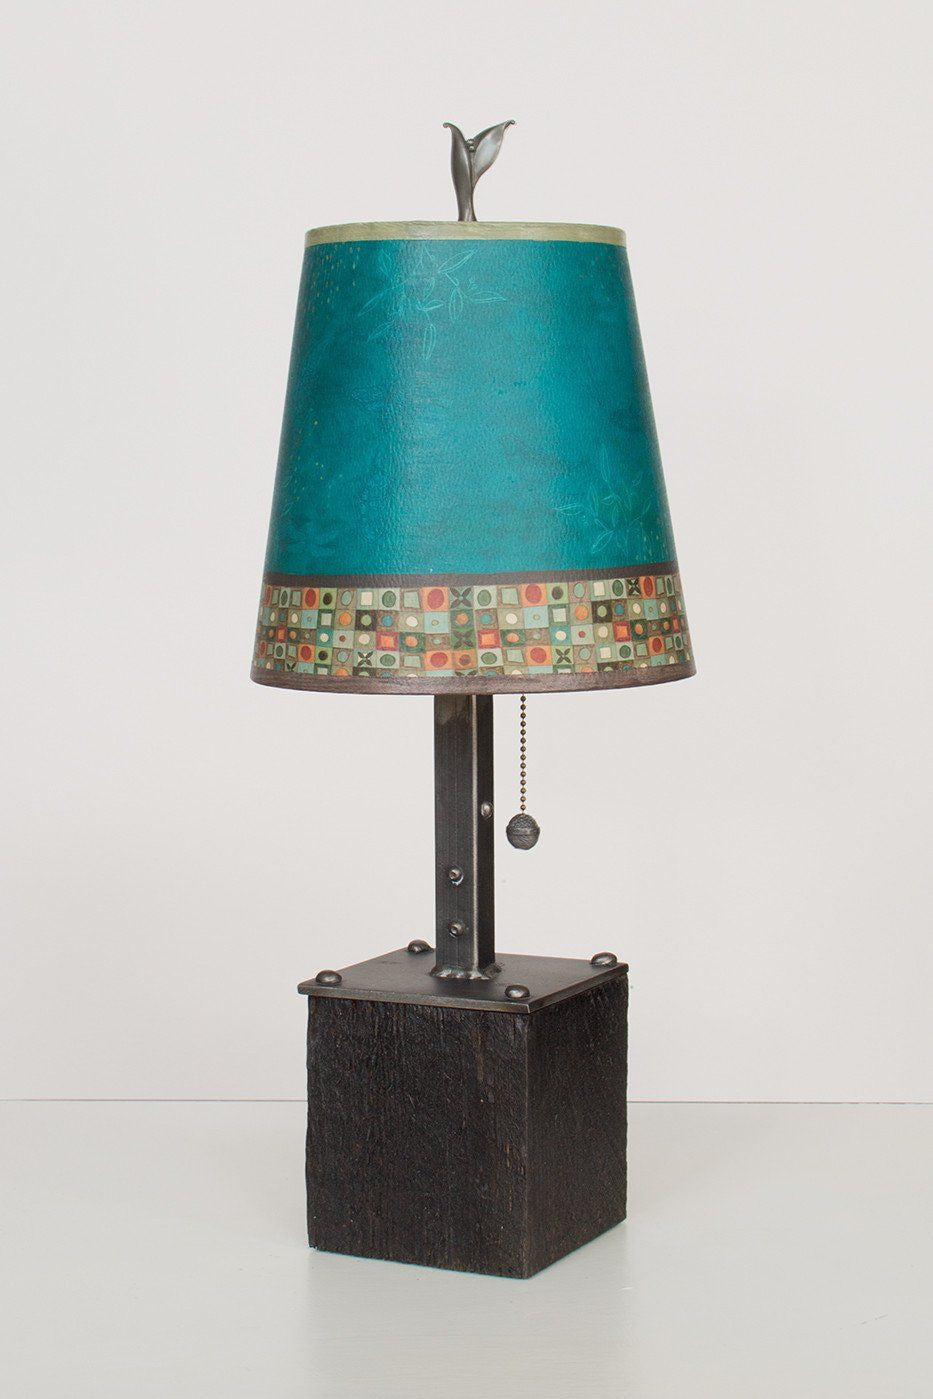 Steel Table Lamp on Reclaimed Wood with Small Drum Shade in Jade Mosaic